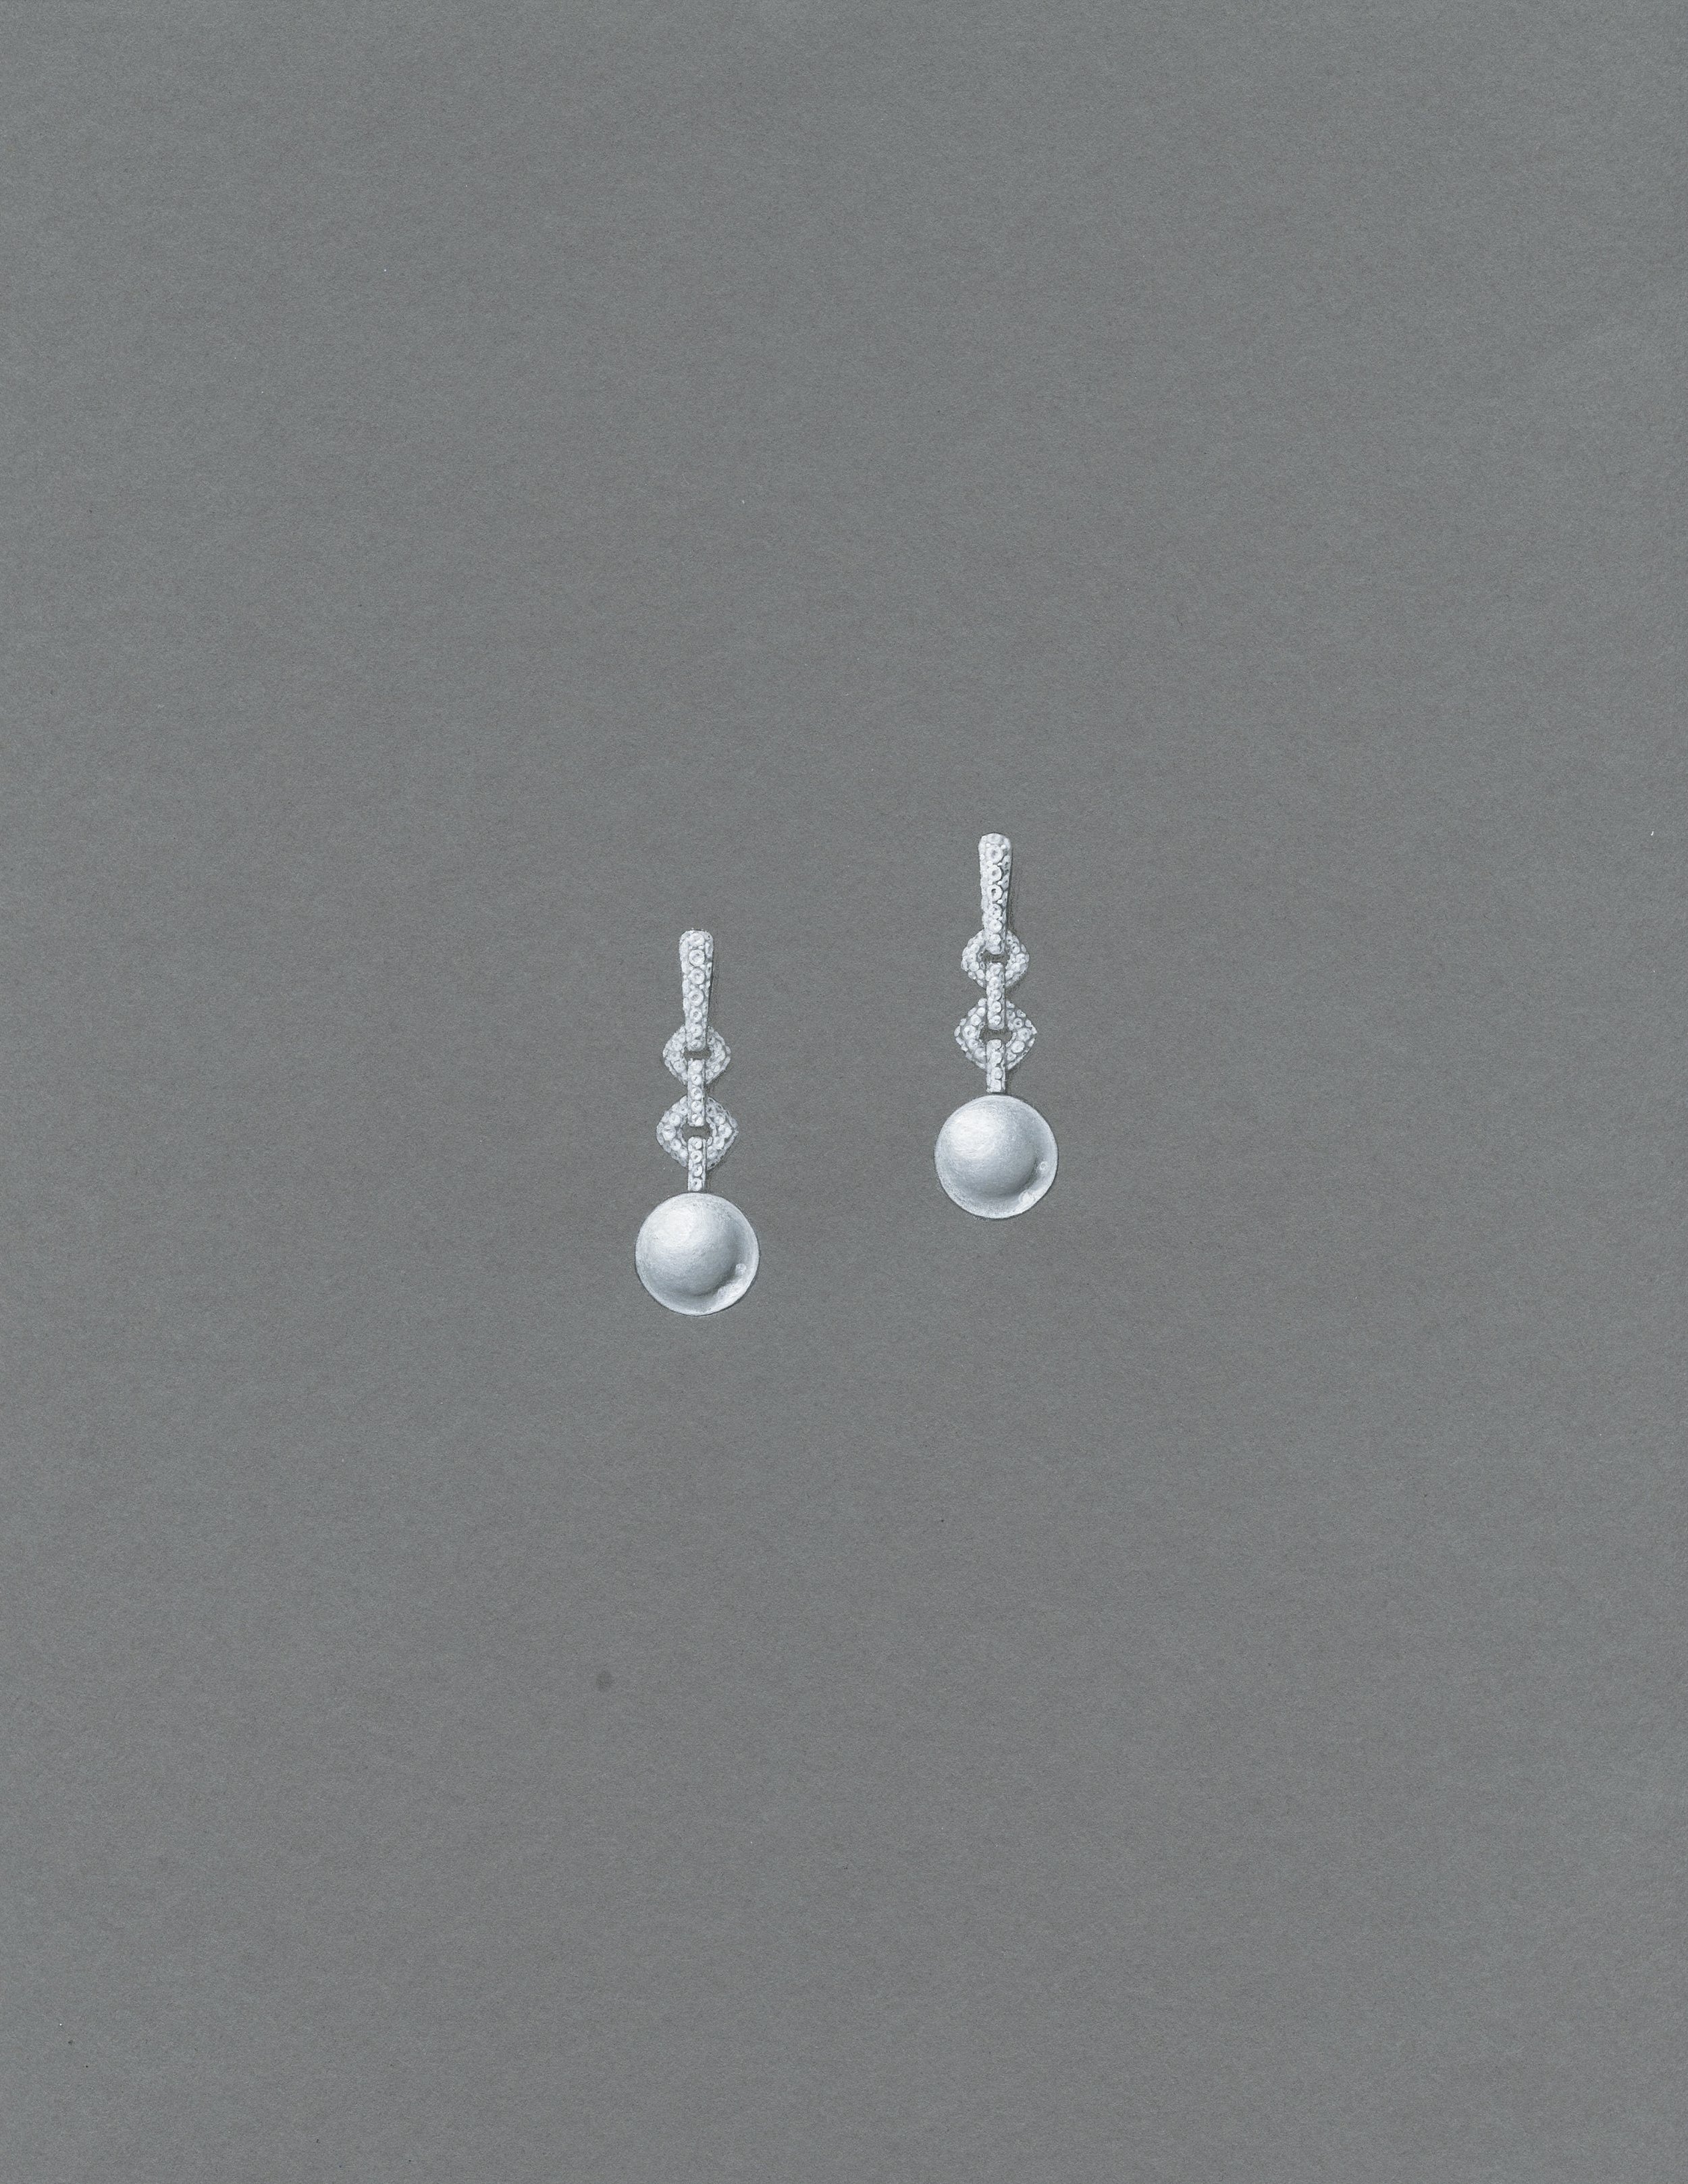  Gouache painting of a pair of earrings with white South Sea pearls and white pave set in 18k white gold. 